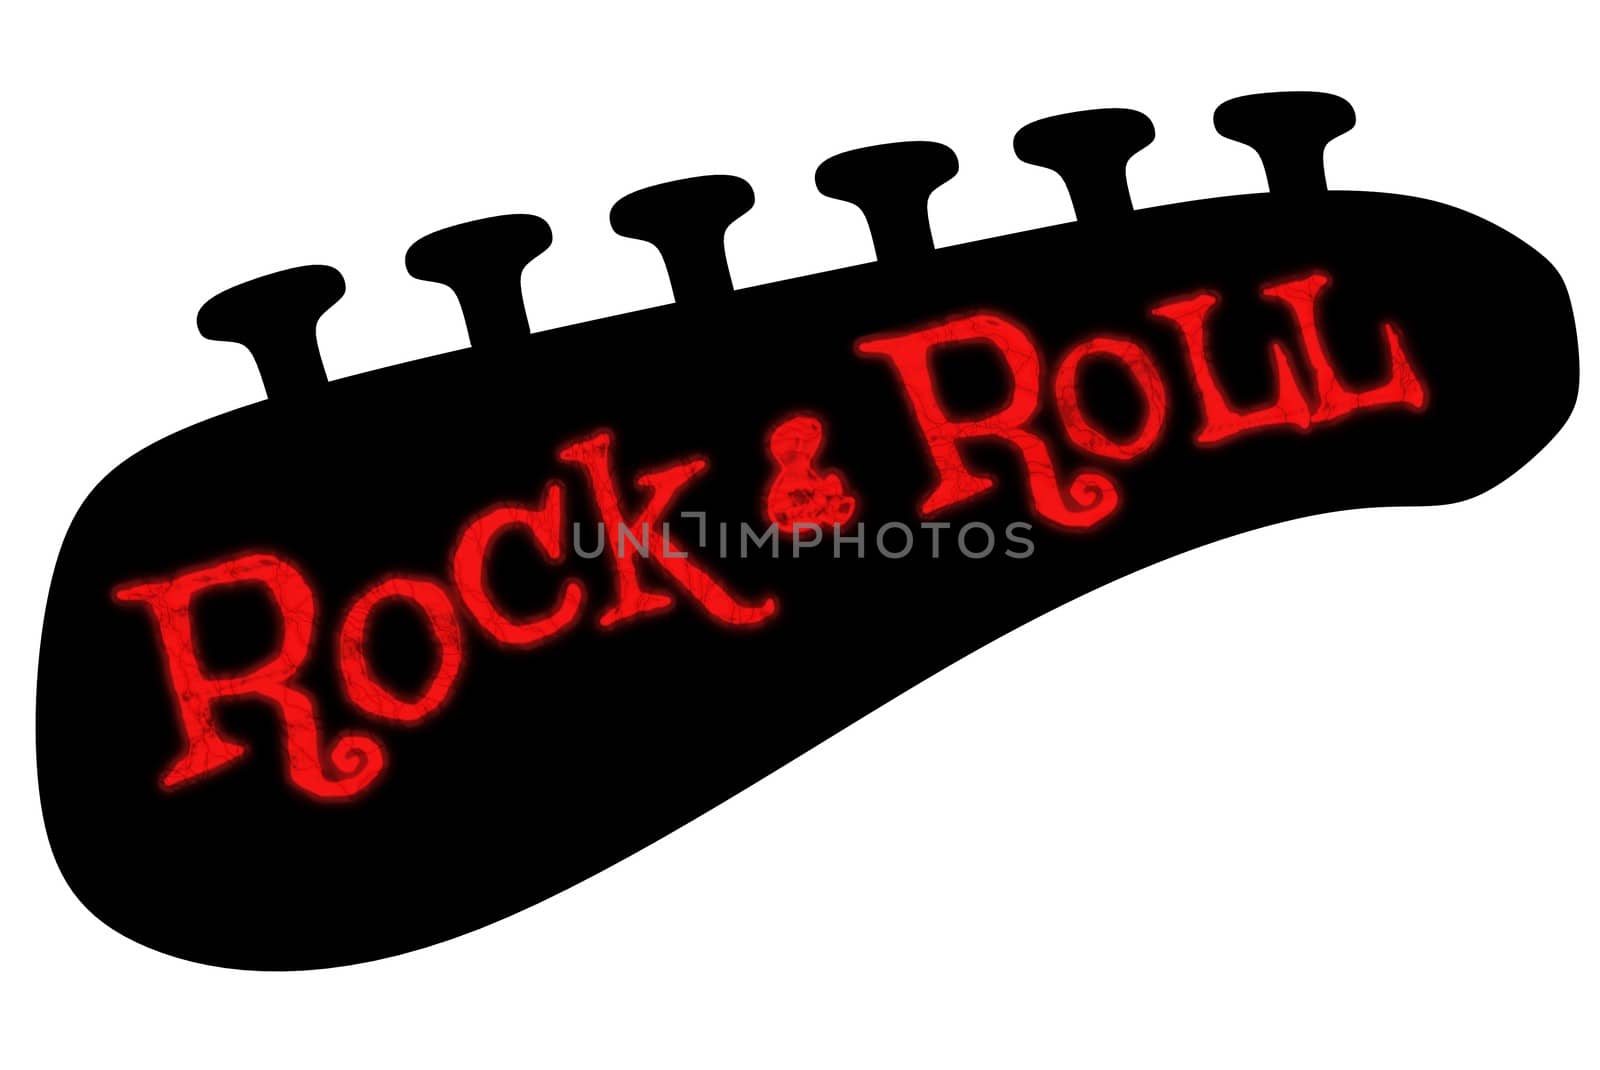 Illustration of a guitar headstock tuners and the words Rock & Roll in grunge text